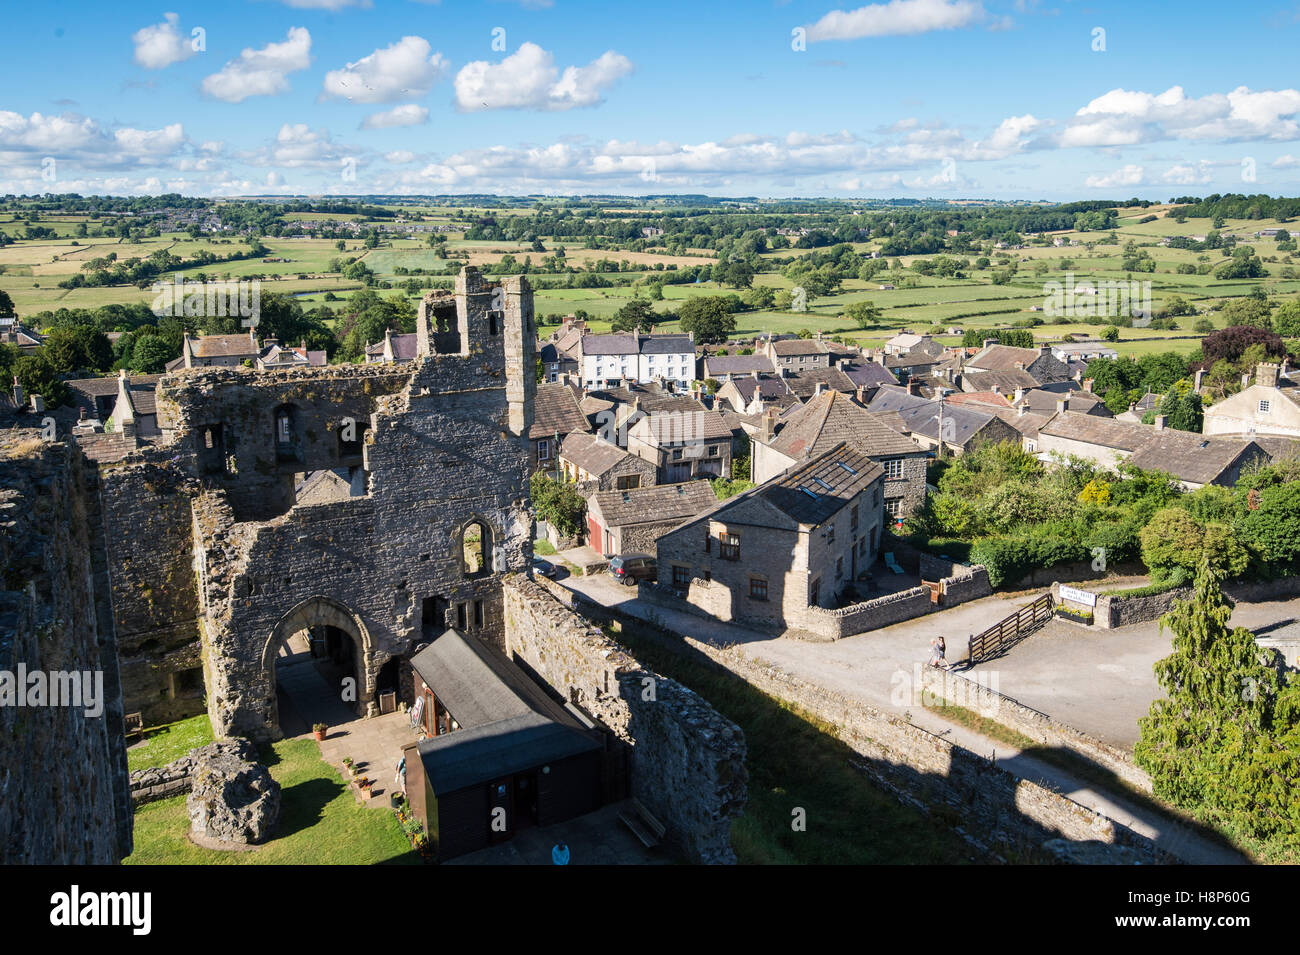 UK, England, Yorkshire, Wensleydale, Middleham - The small town of Middleham located in Wensleydale, a county of North Yorkshire Stock Photo